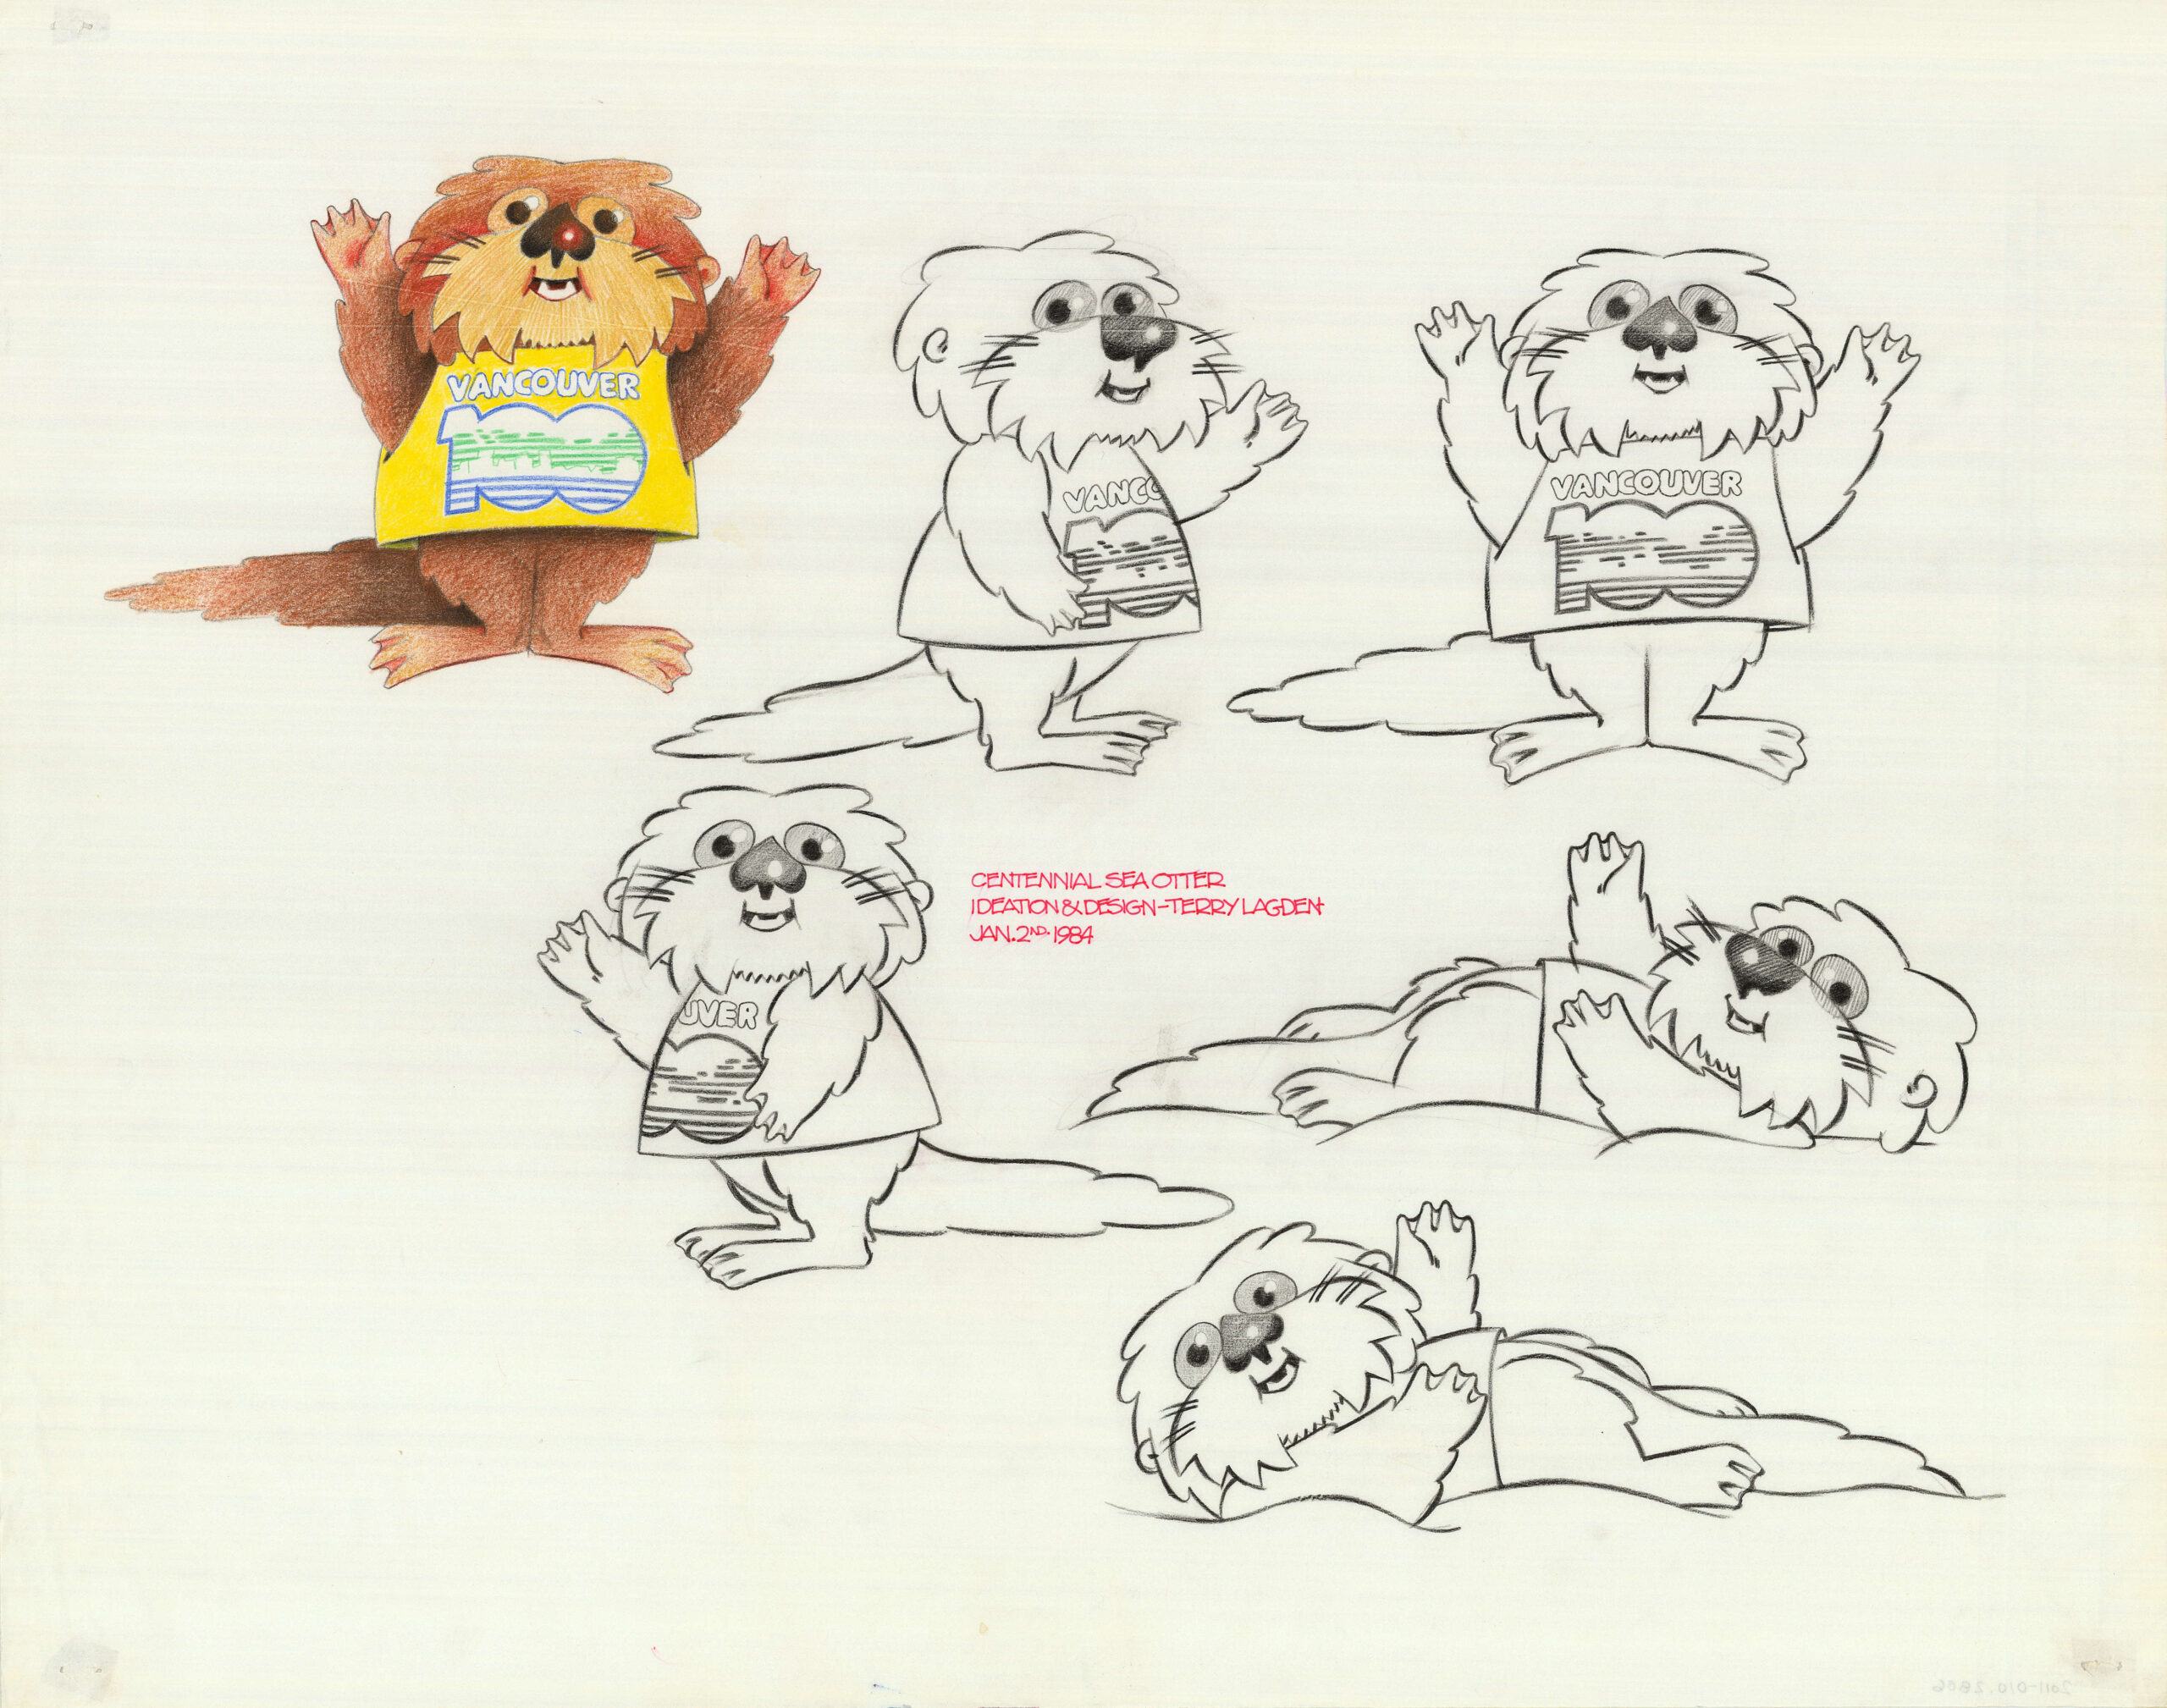 This early design shows the centennial sea otter in various poses. Reference Code: AM1576-S6-13-F27-: 2011-010.2806